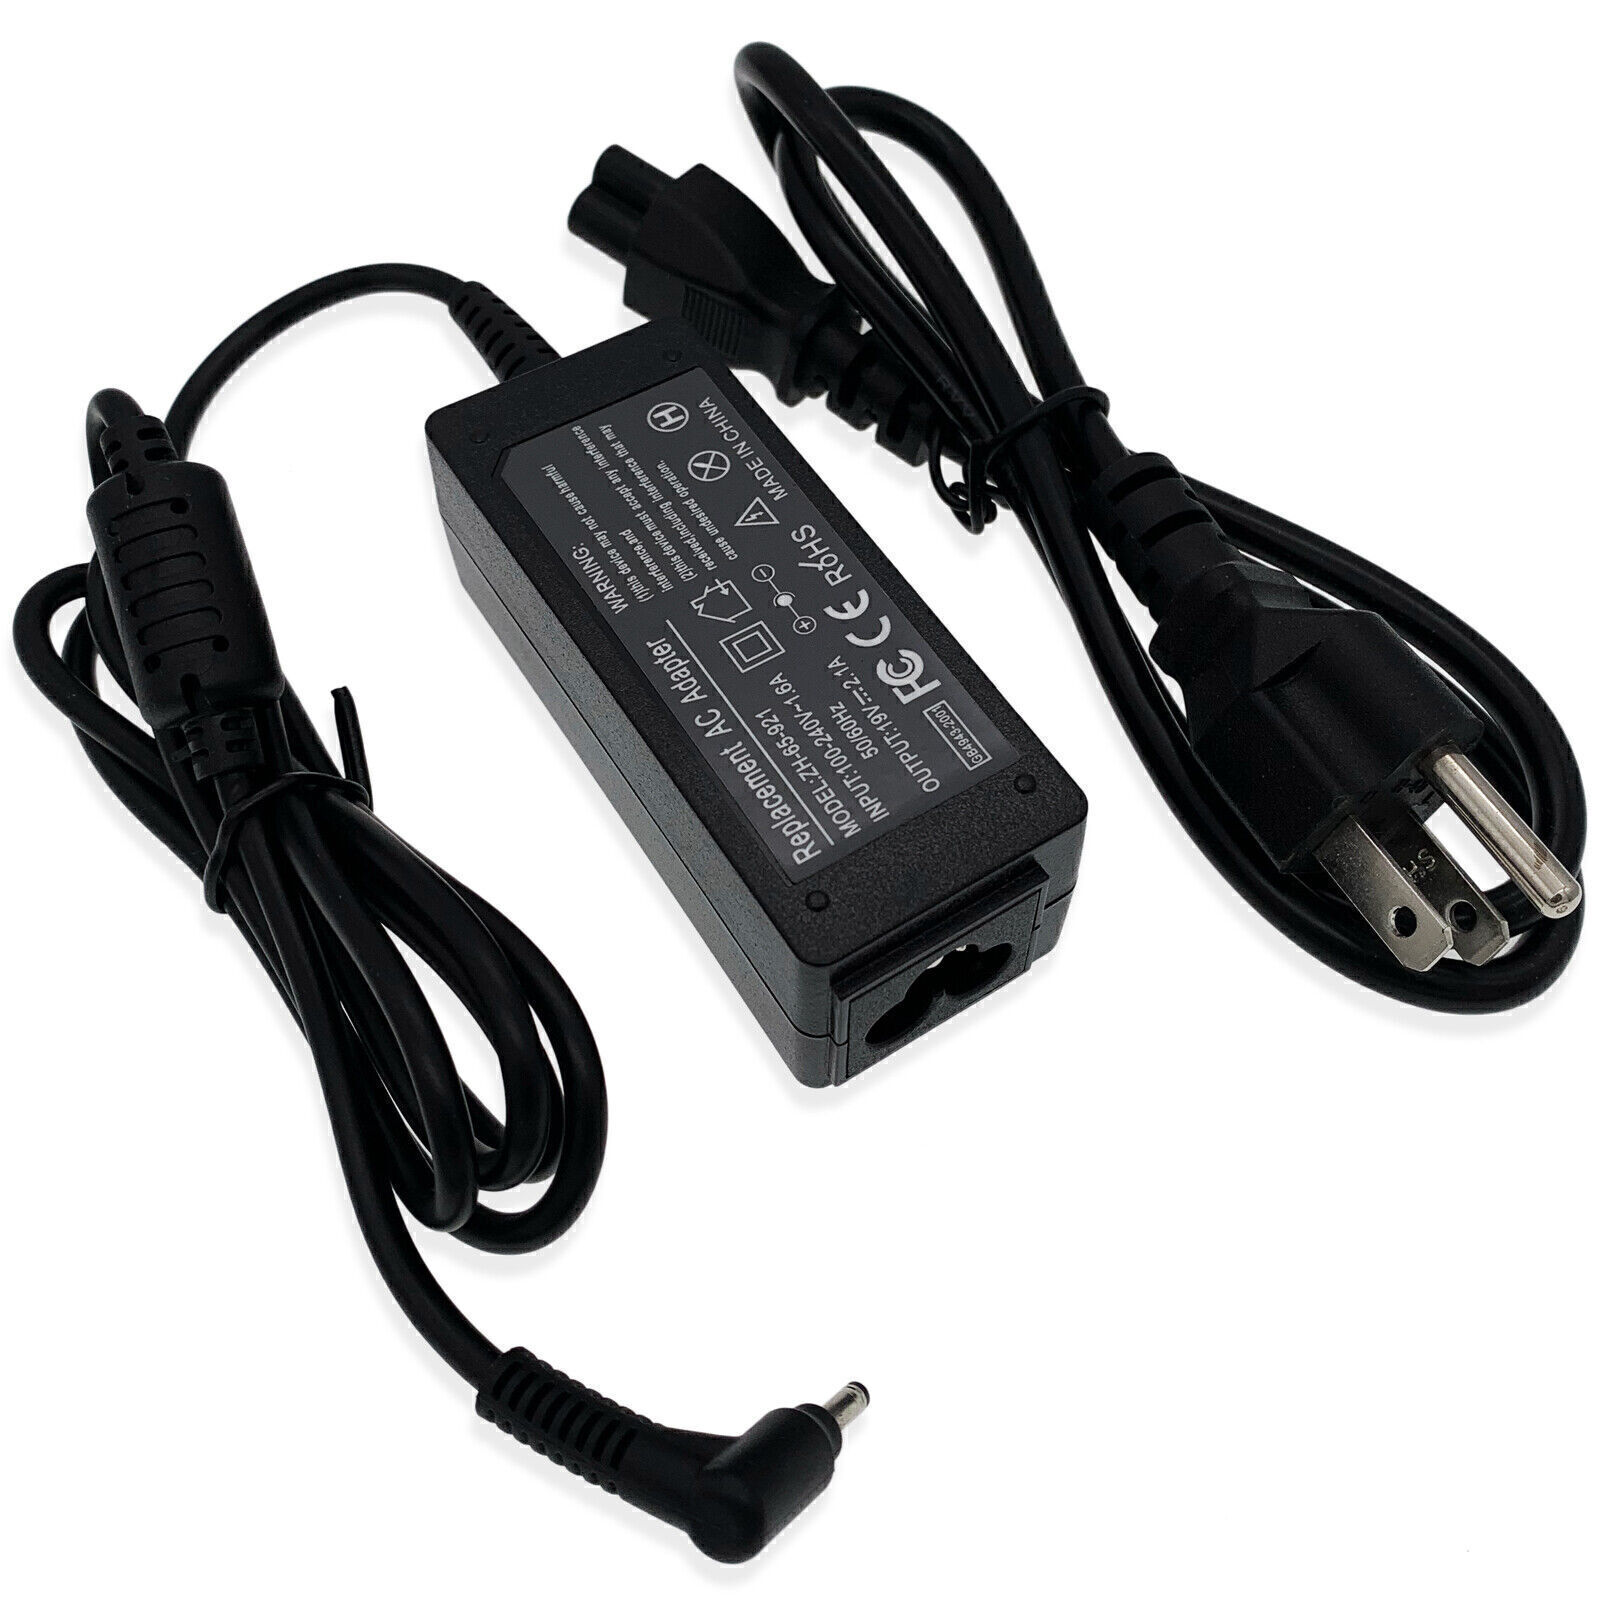 A13-040N2A For Samsung Flex Alpha NP730QCJ-K02US 40W AC Adapter Charger Power